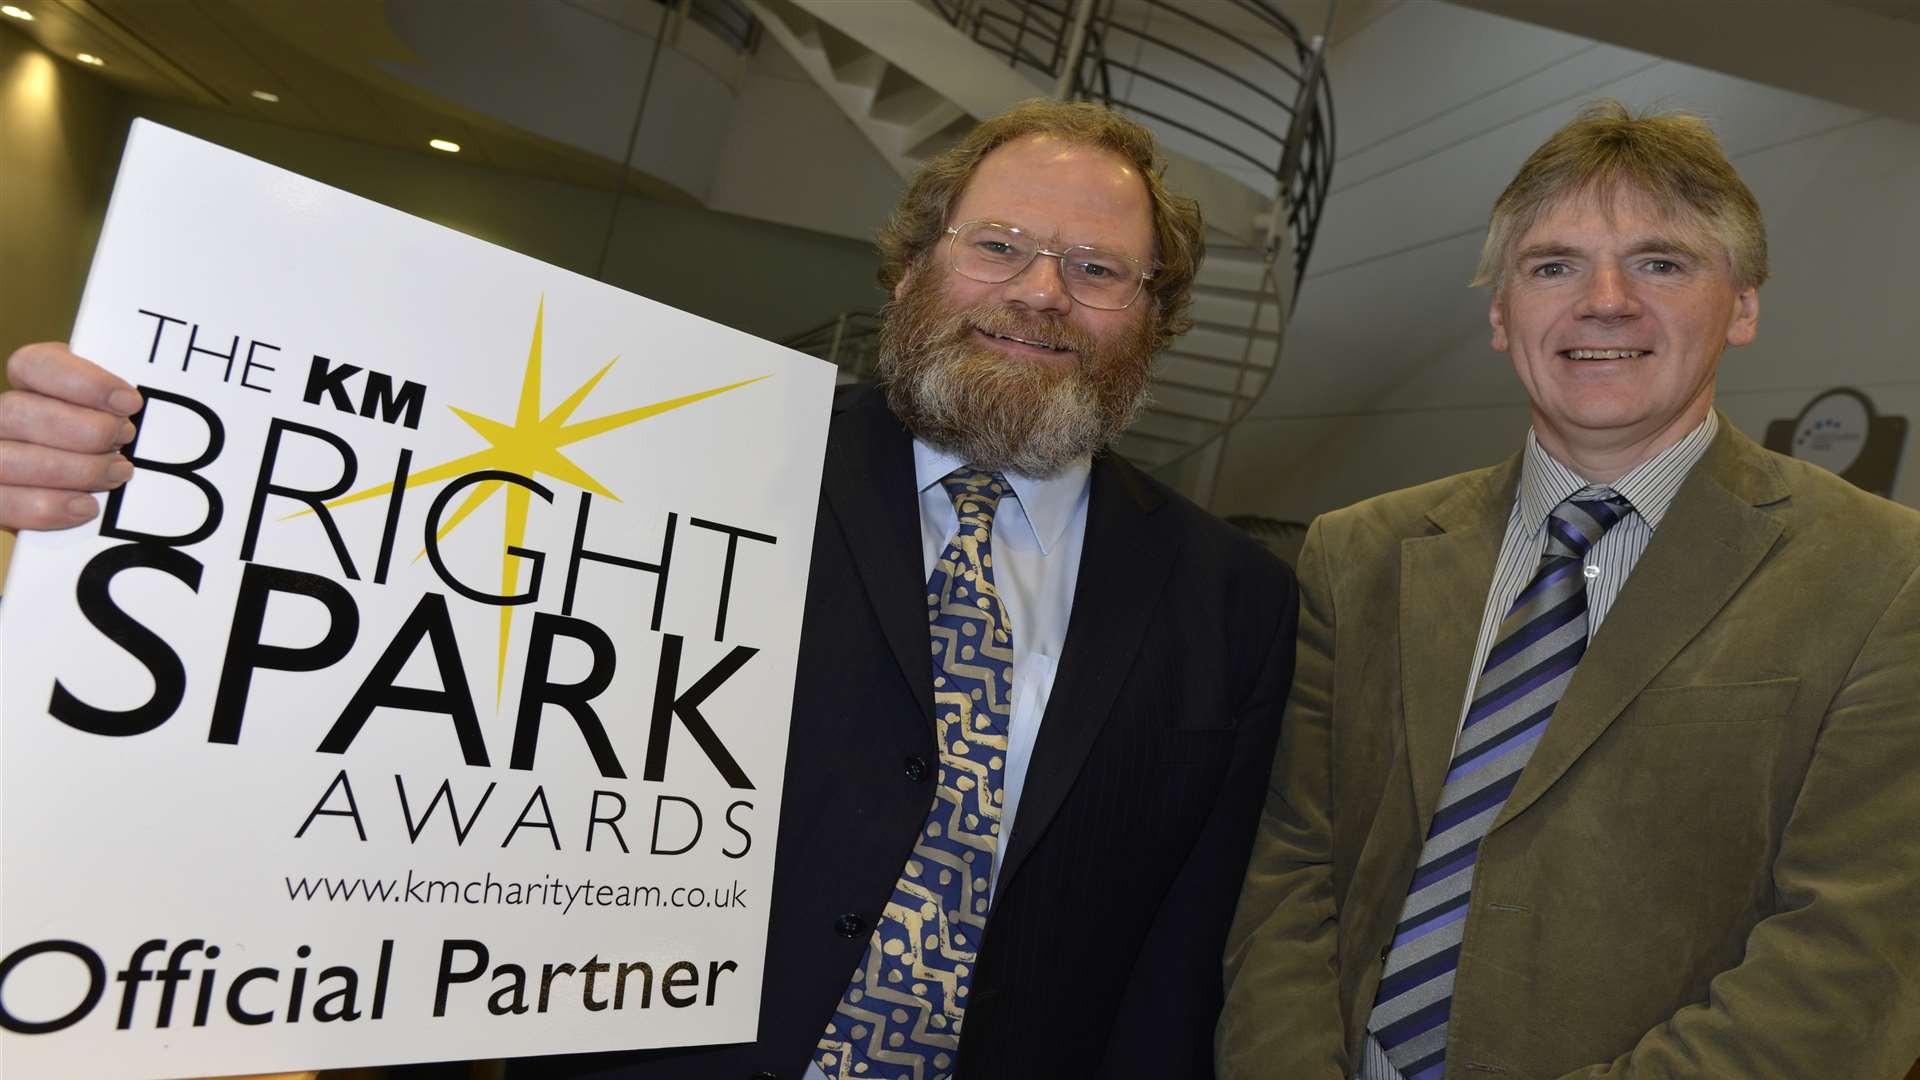 Profs Peter Clarkson and Martin Warren from the science faculty of the University of Kent which is backing the KM Bright Spark Awards 2015.